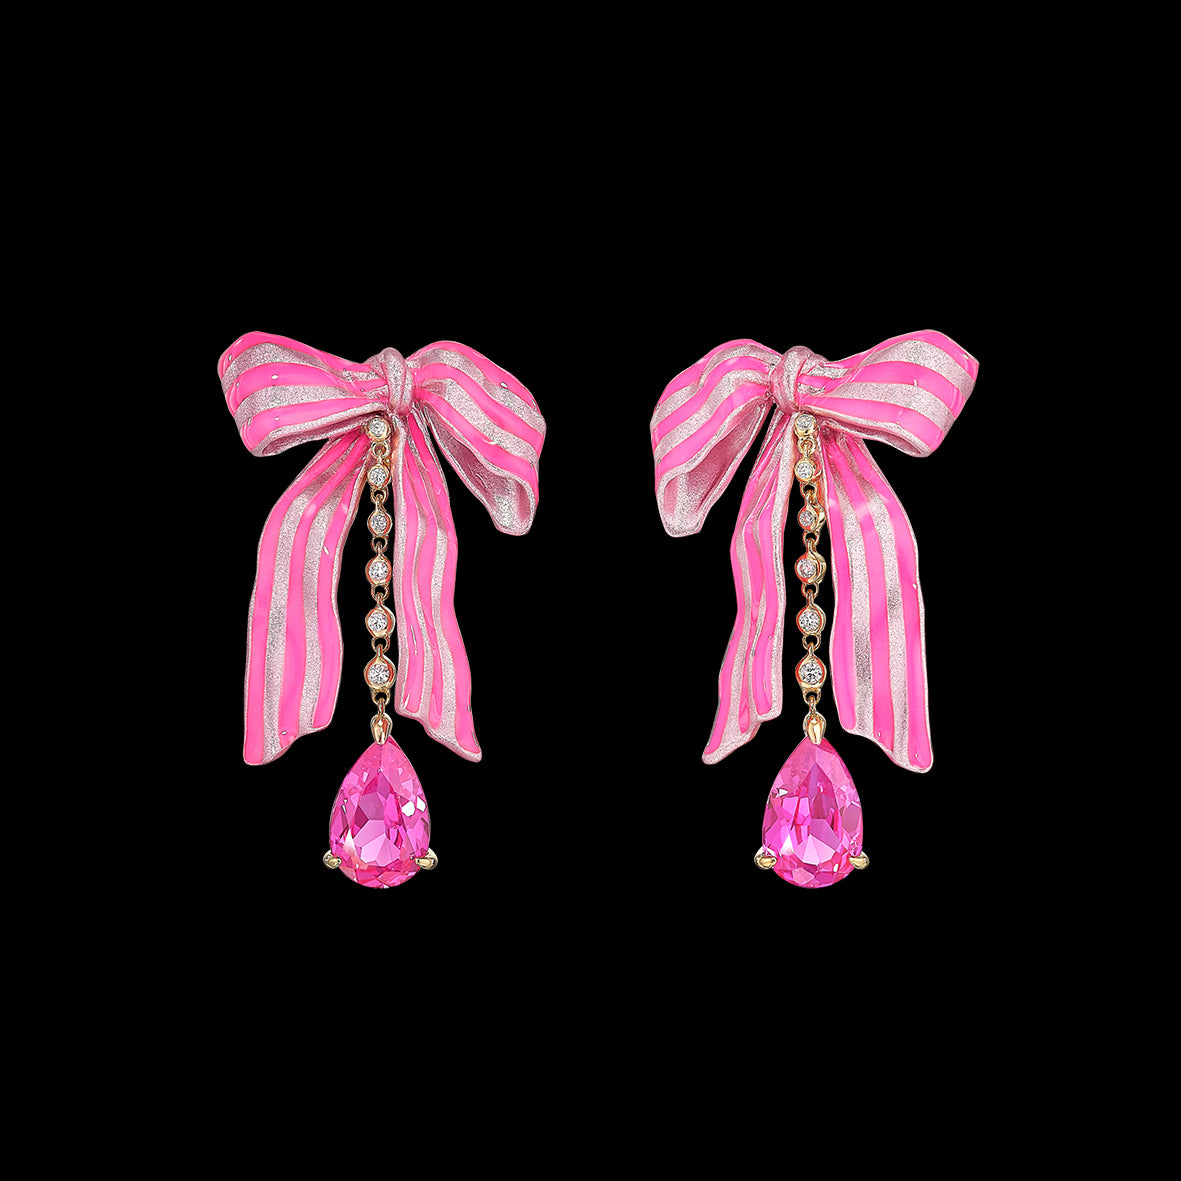 Fuchsia Bardot Bow Earrings, Earring, Anabela Chan Joaillerie - Fine jewelry with laboratory grown and created gemstones hand-crafted in the United Kingdom. Anabela Chan Joaillerie is the first fine jewellery brand in the world to champion laboratory-grown and created gemstones with high jewellery design, artisanal craftsmanship and a focus on ethical and sustainable innovations.